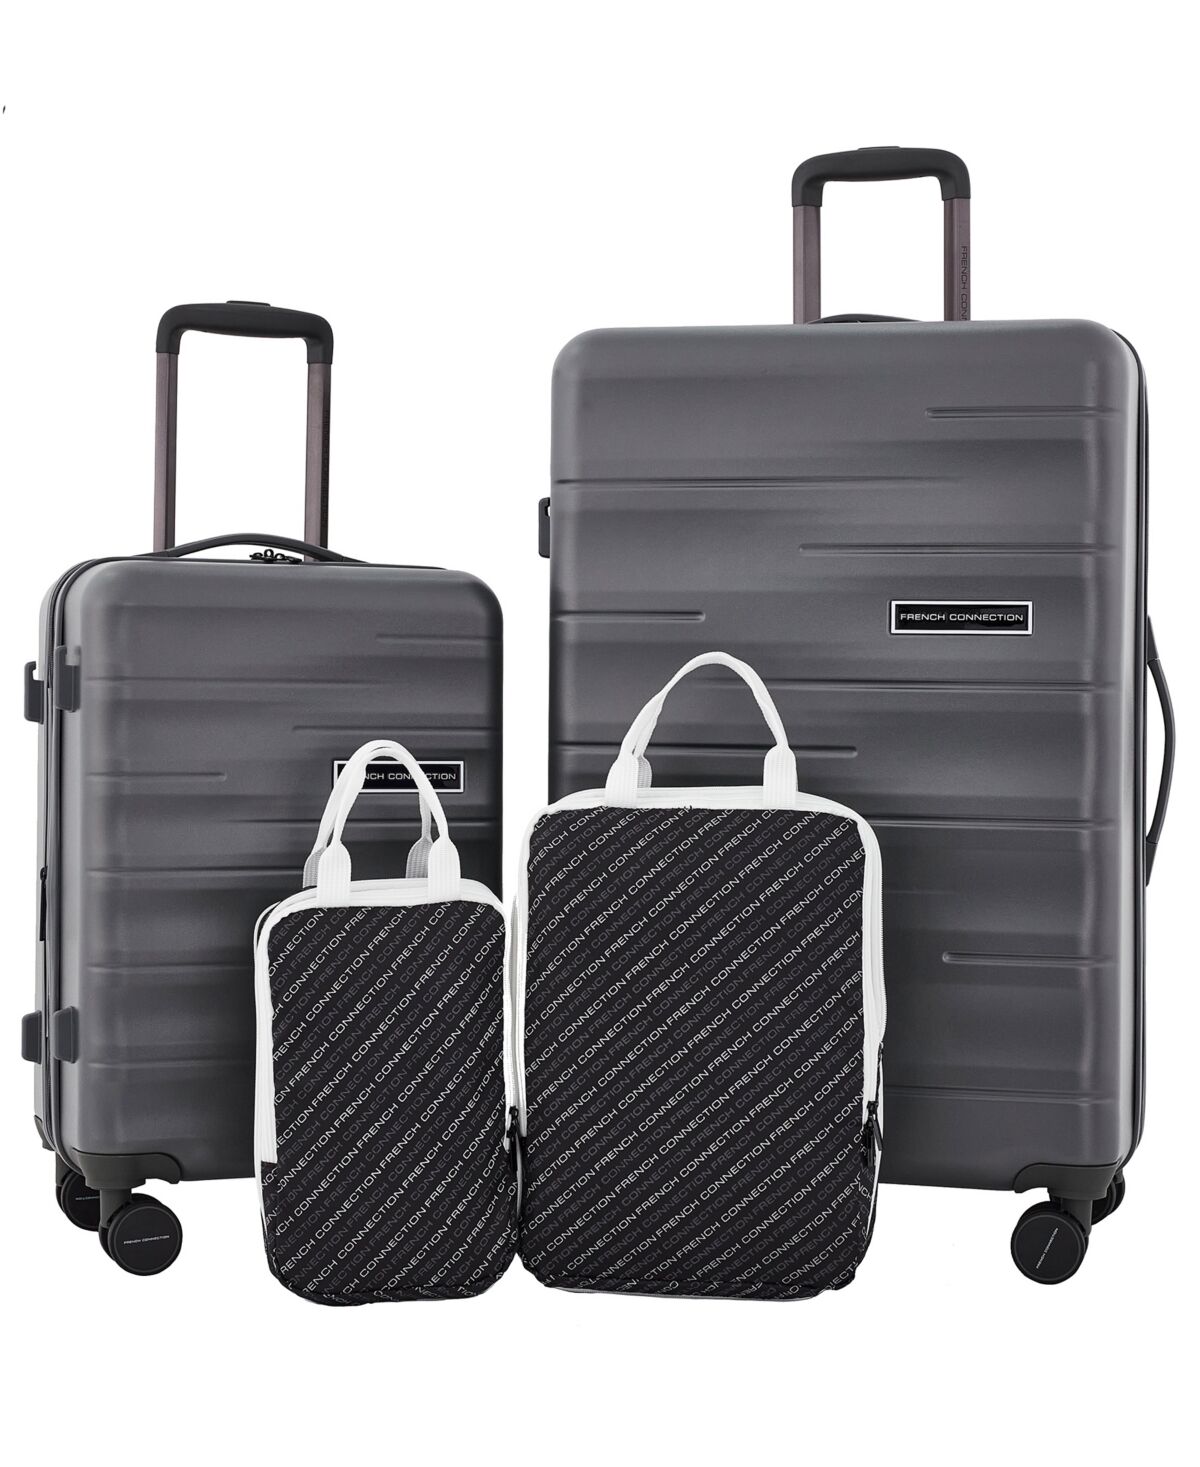 Travelers Club French Connection 4Pc Expandable Rolling Hardside Luggage Set - Gunmetal Matte